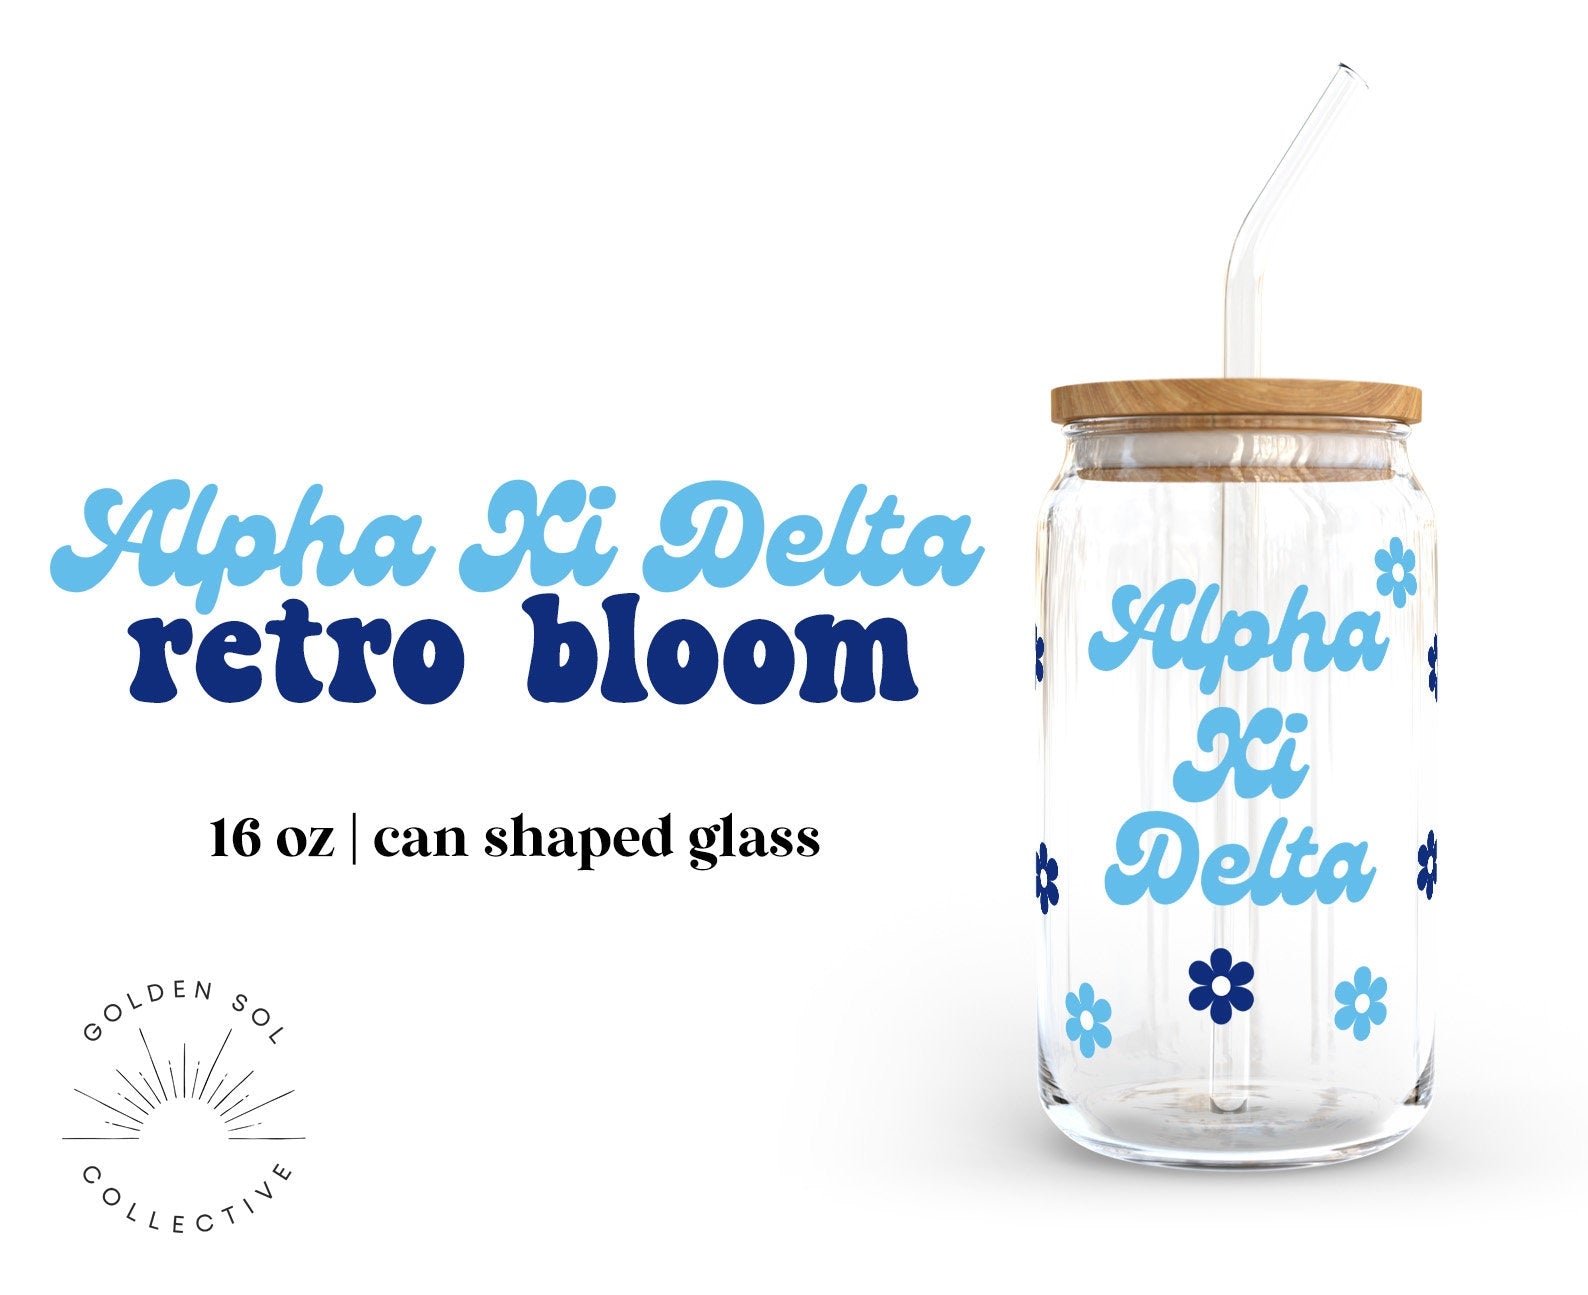 Alpha Xi Delta Glass Water Bottle with Silicone Sleeve – SororityShop